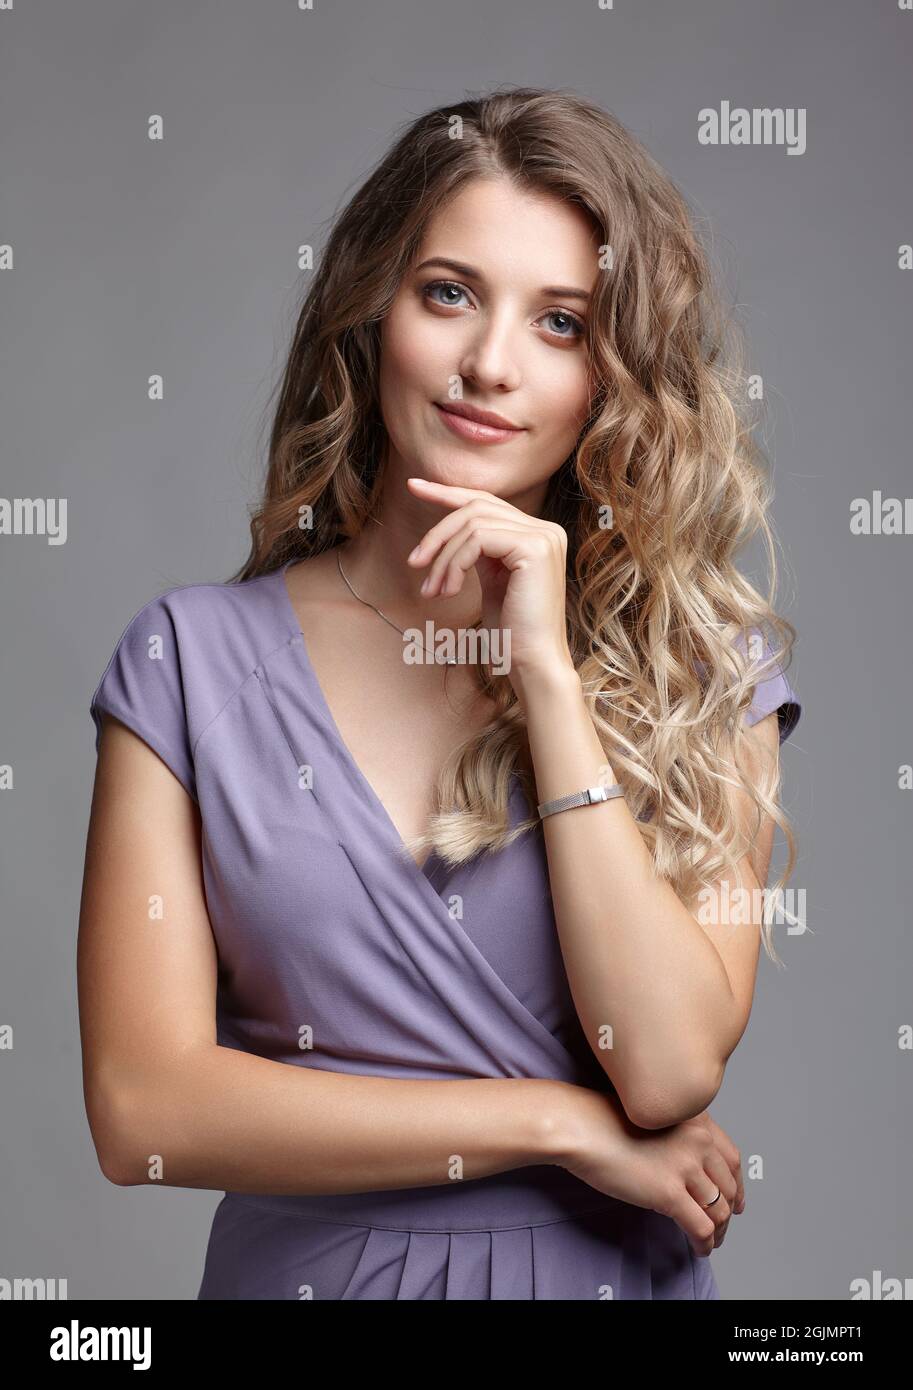 Studio beauty portrait of a young woman in a summer dress. Blond female in a summer dress posing over gray background. Girl with hand near face. Stock Photo